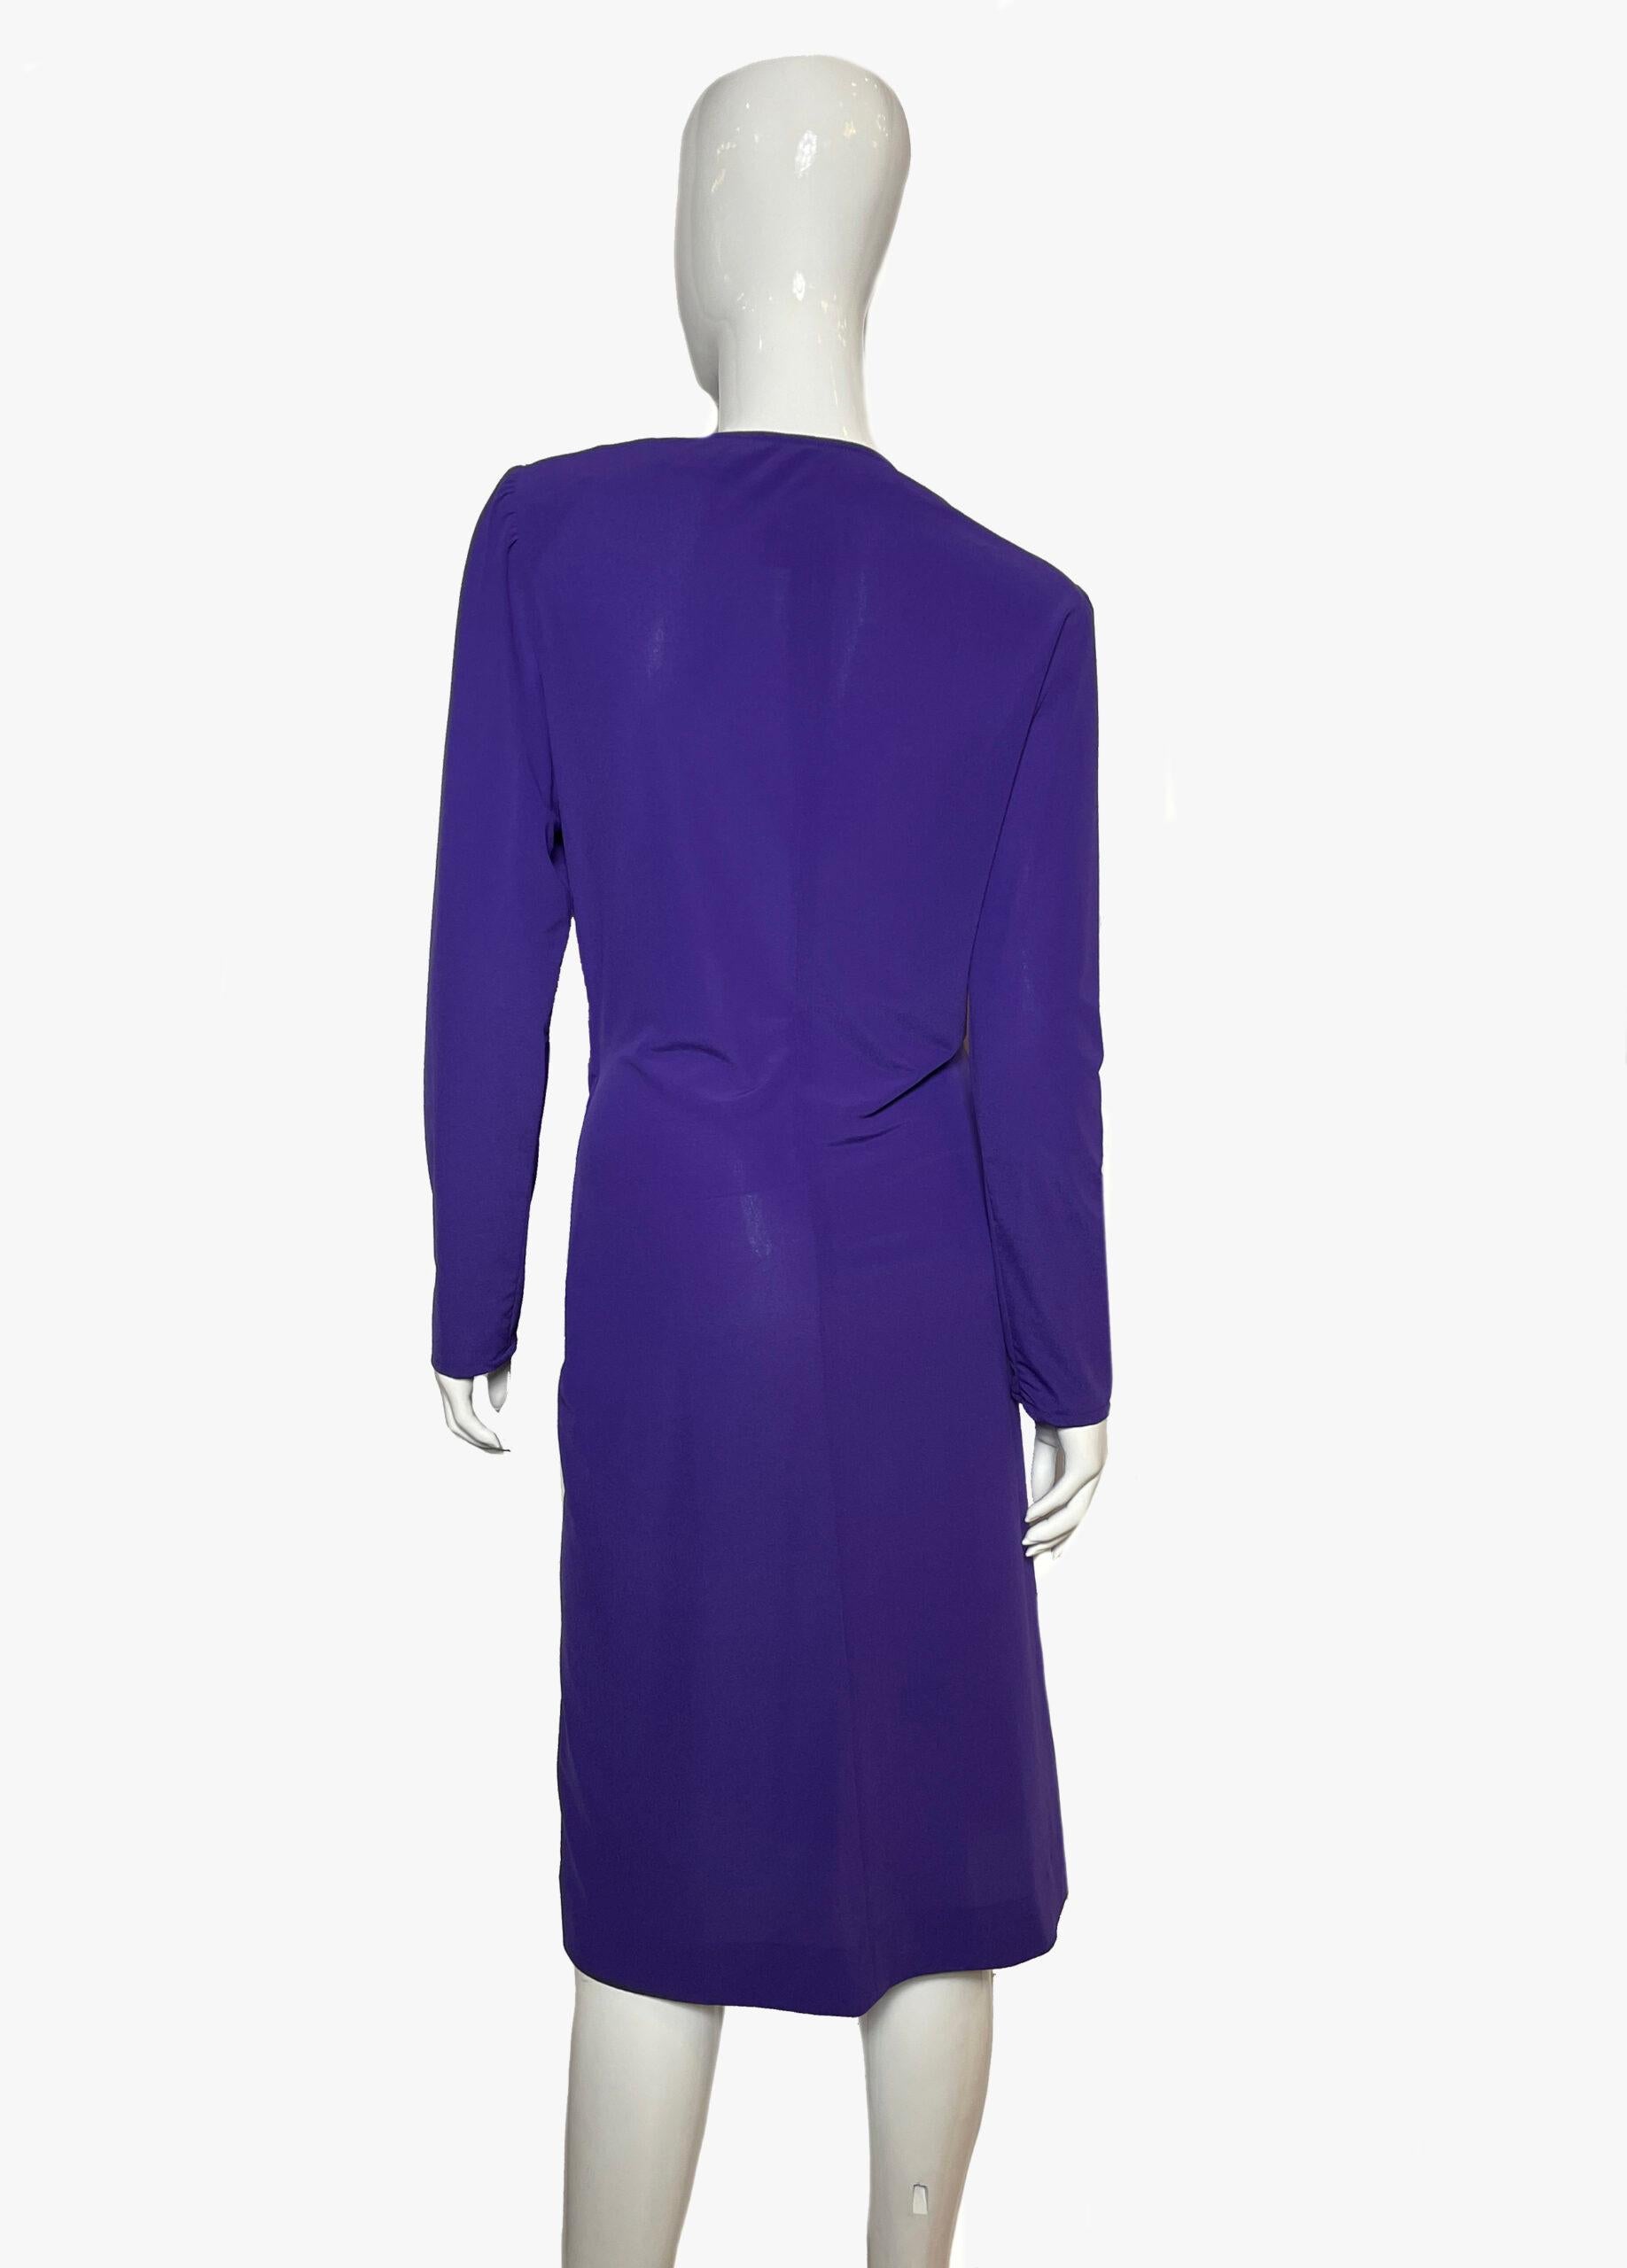 Edith Flag Vintage Dress, 1980s In Good Condition For Sale In New York, NY